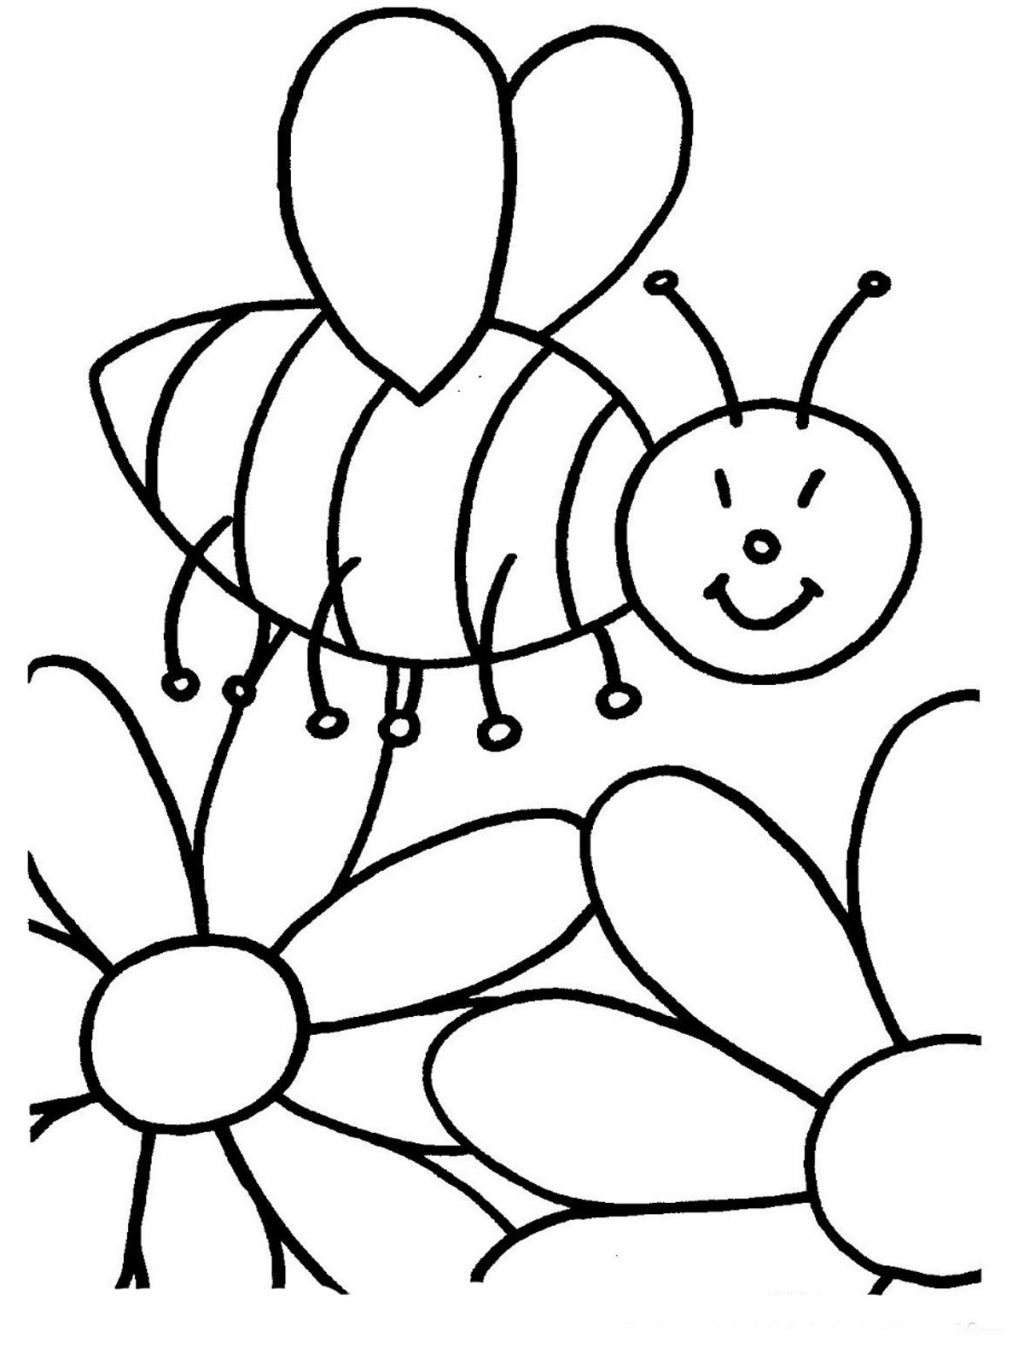 Coloring Page ~ Free Printable Coloring Pages For Toddlers Kid On - Free Printable Coloring Pages For Toddlers